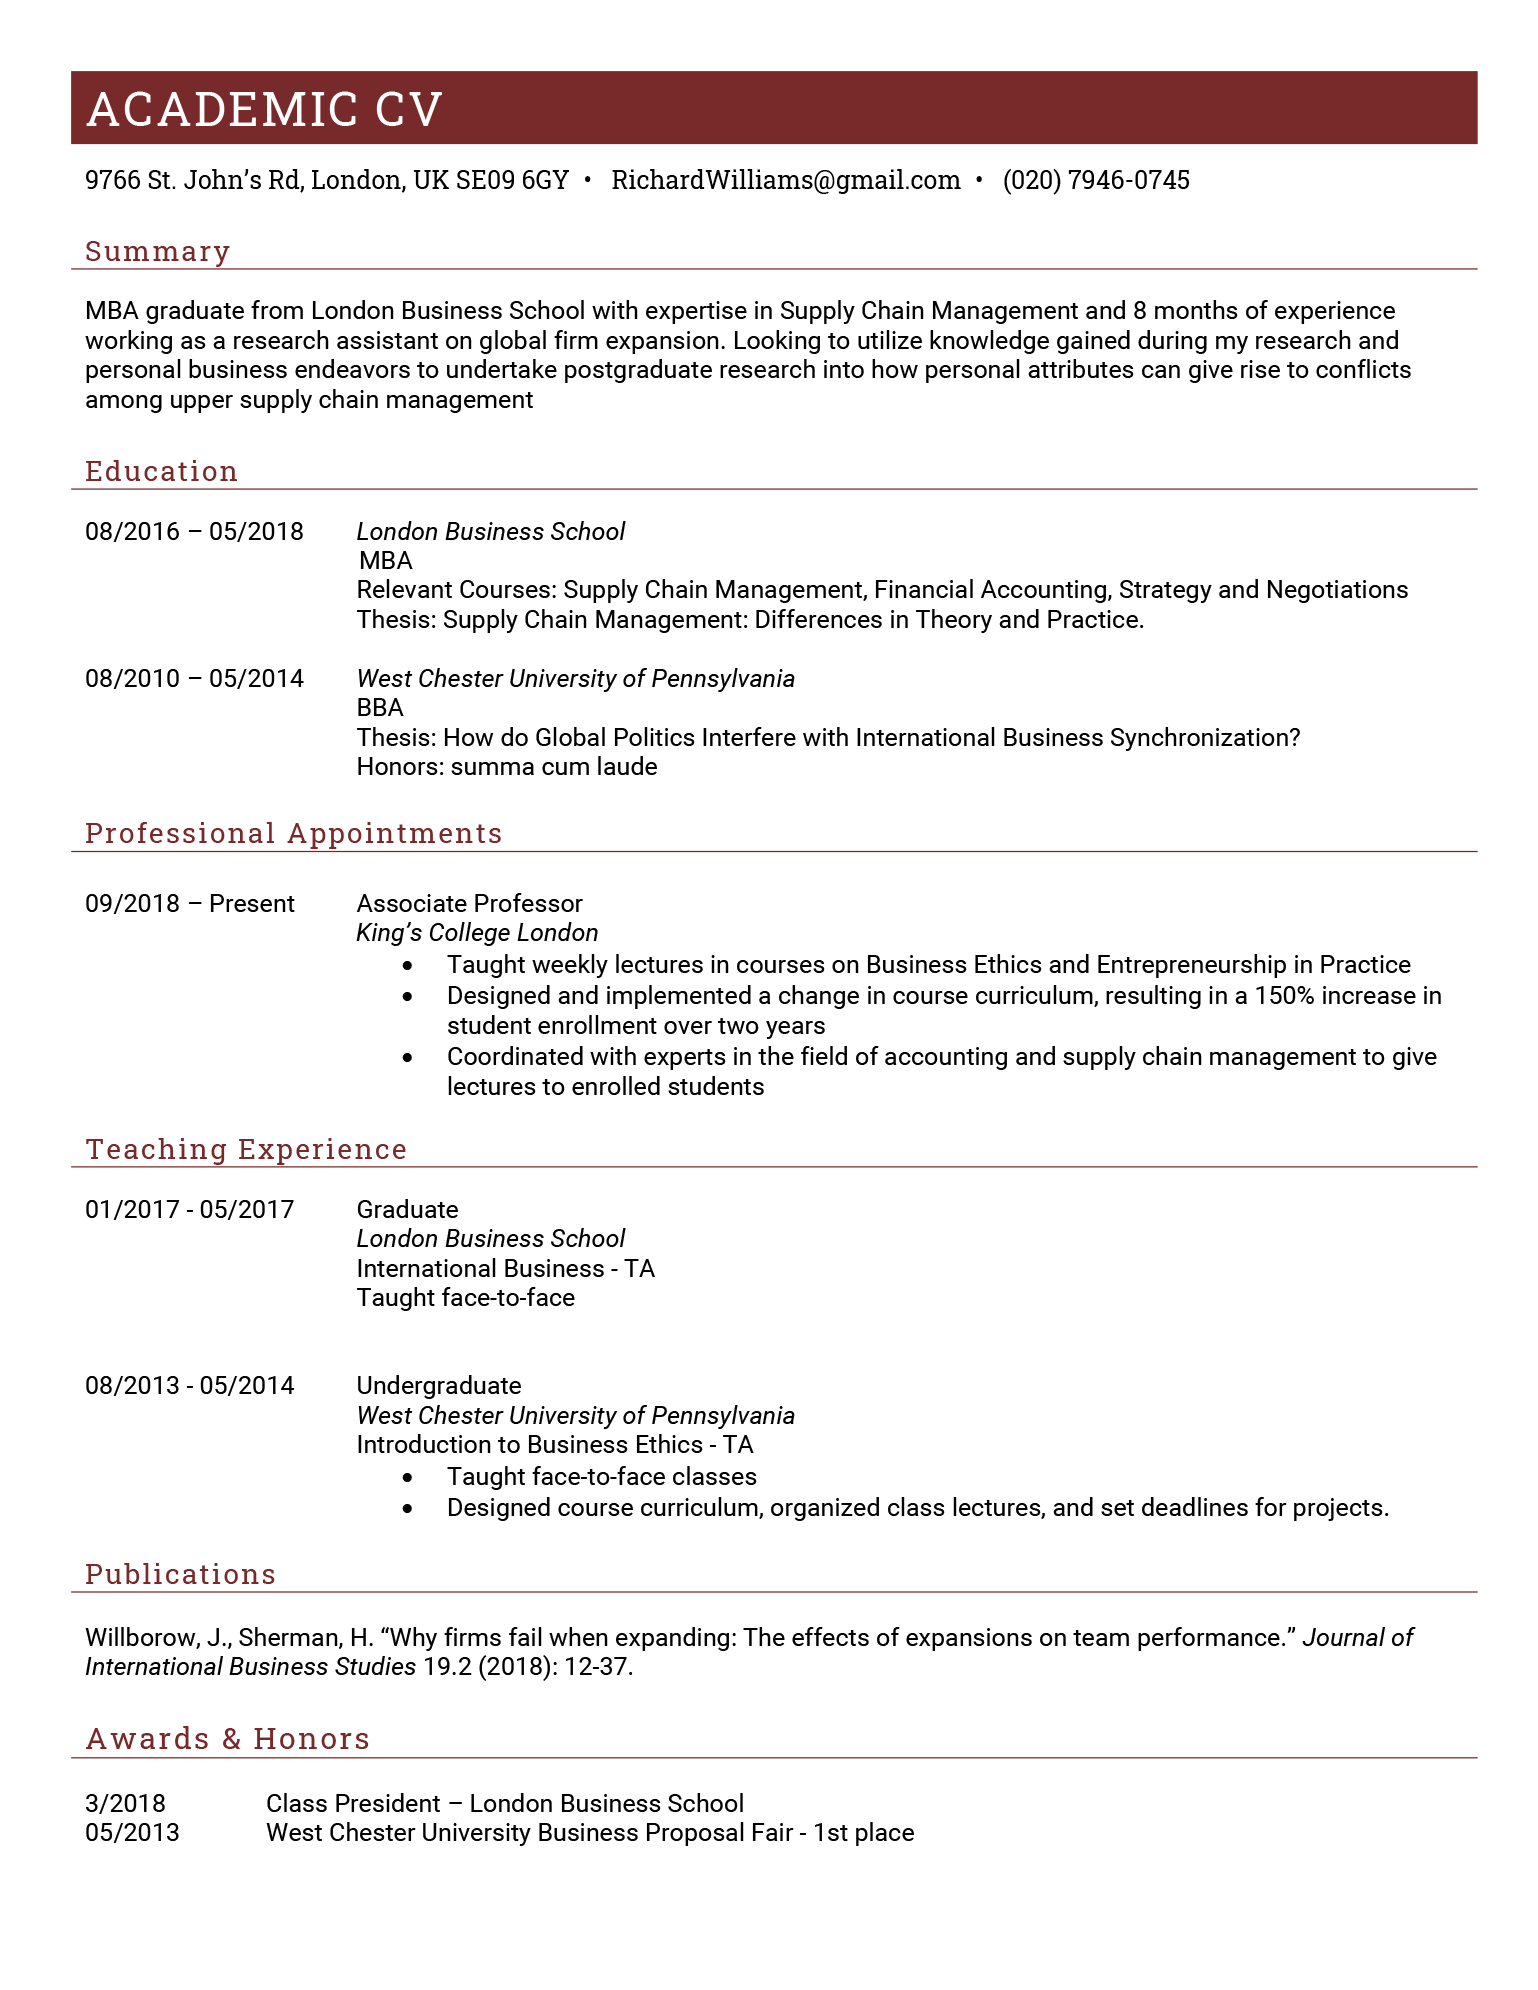 An example showing how to write a cv as an academic